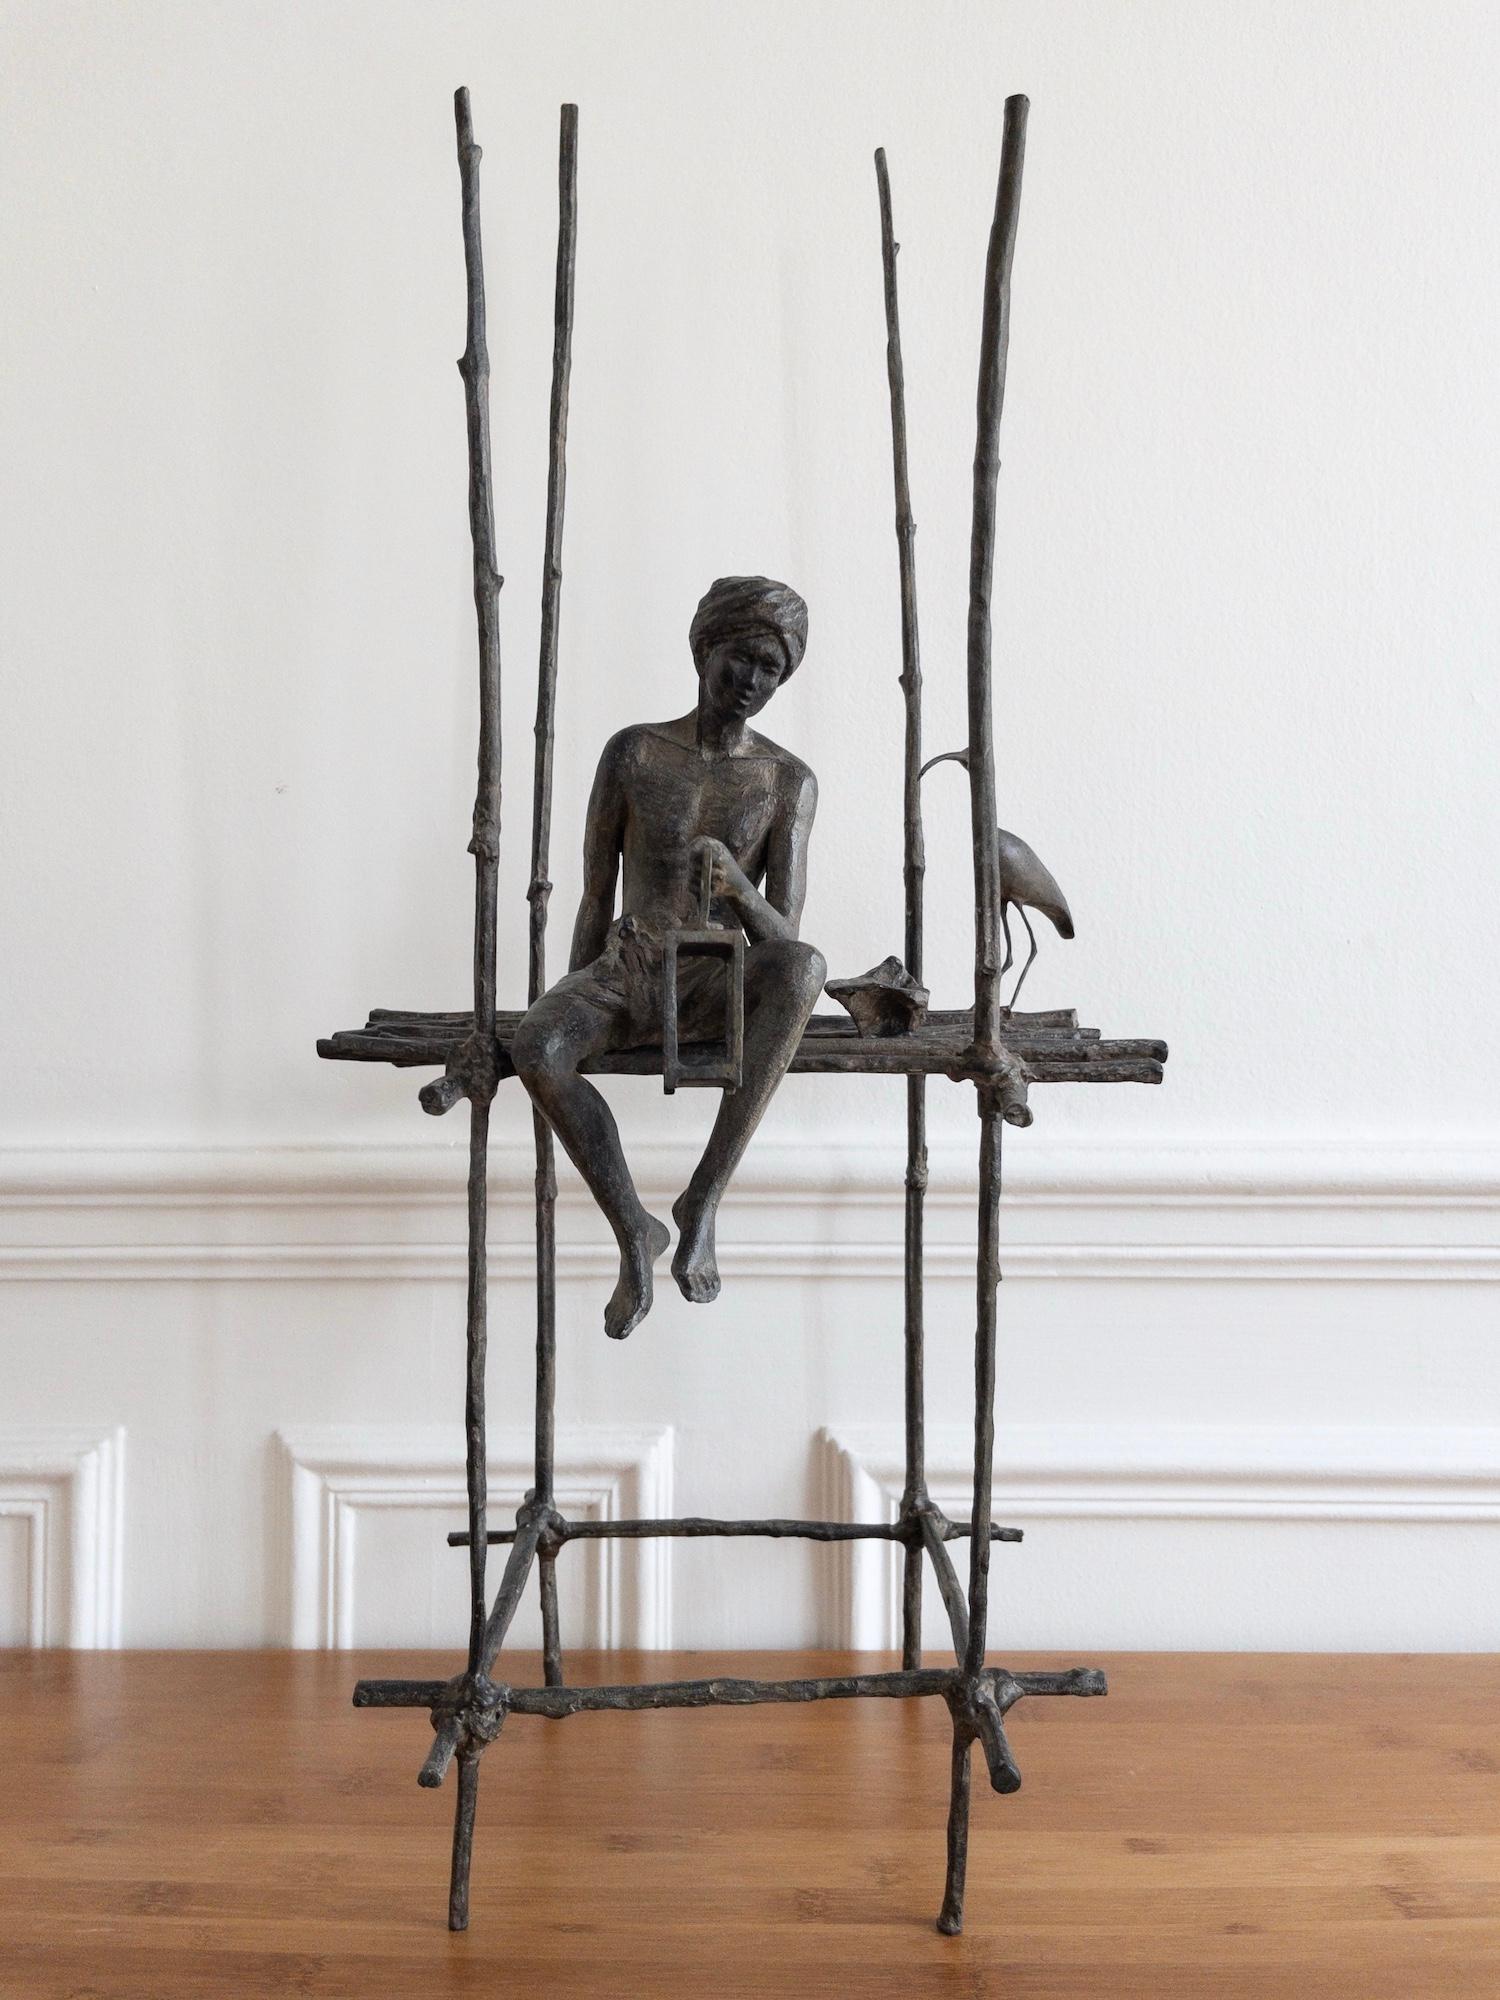 The canticle of the stilts (with ibis) is a bronze sculpture by French contemporary artist Marine de Soos, dimensions are 70 × 30 × 25 cm (27.6 × 11.8 × 9.8 in). 
The sculpture is signed and numbered, it is part of a limited edition of 8 editions +